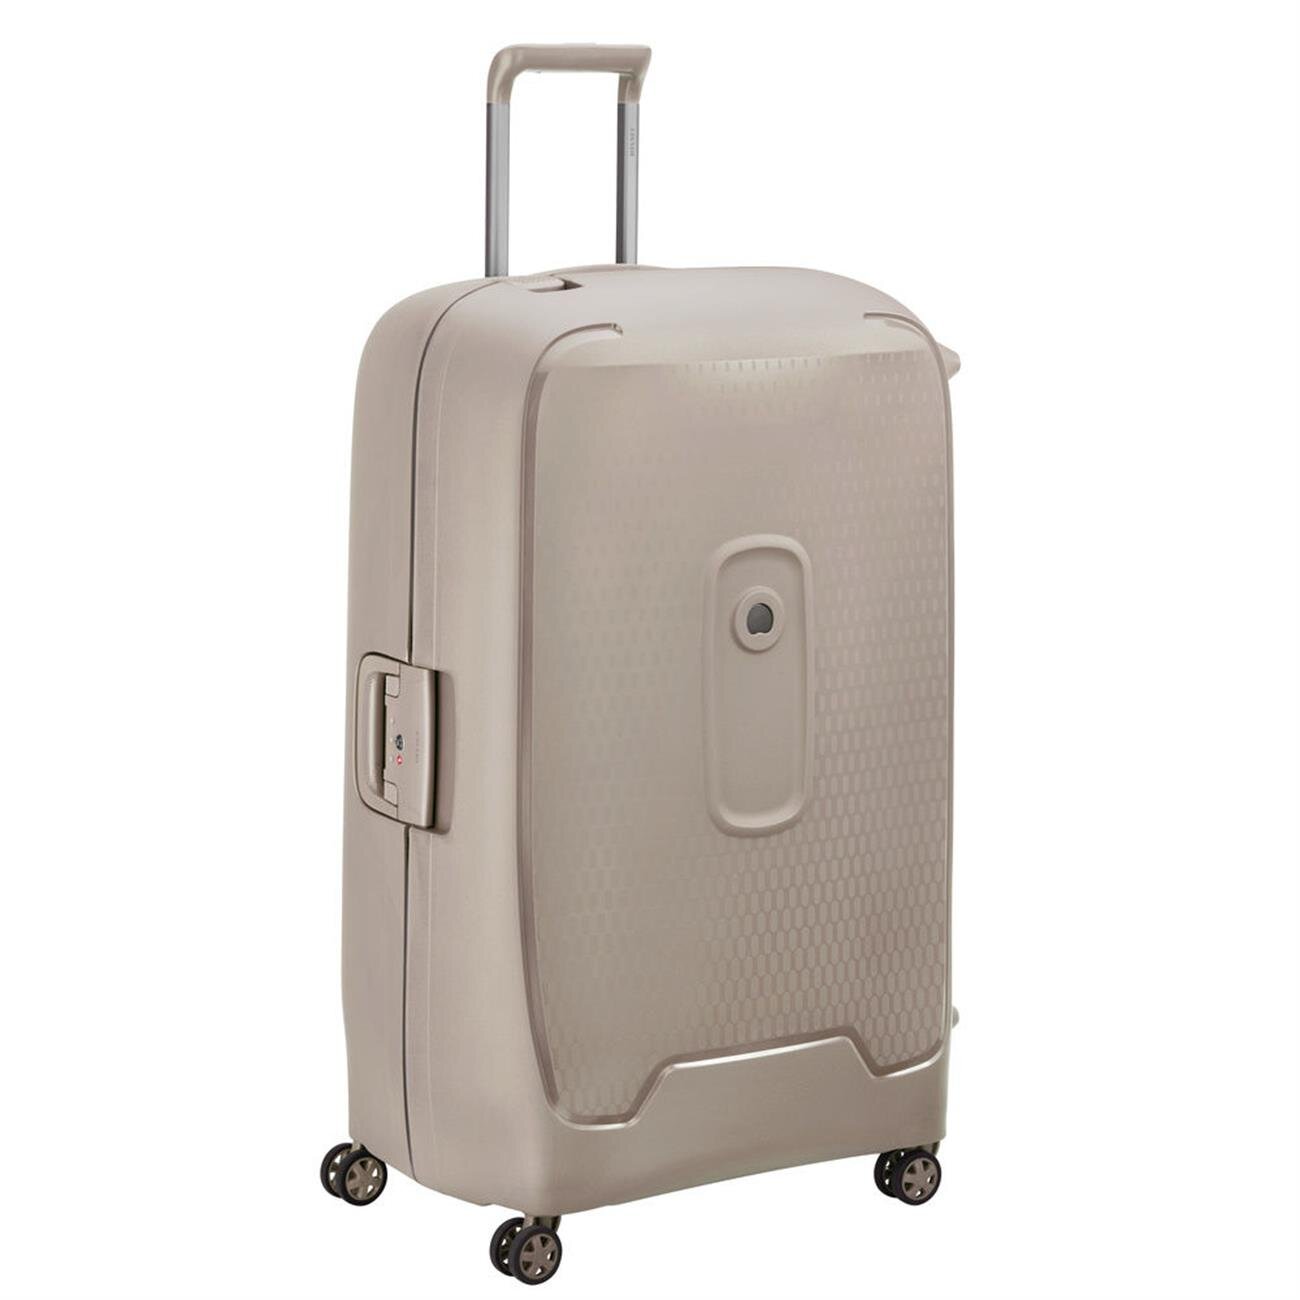 Delsey Moncey luggage